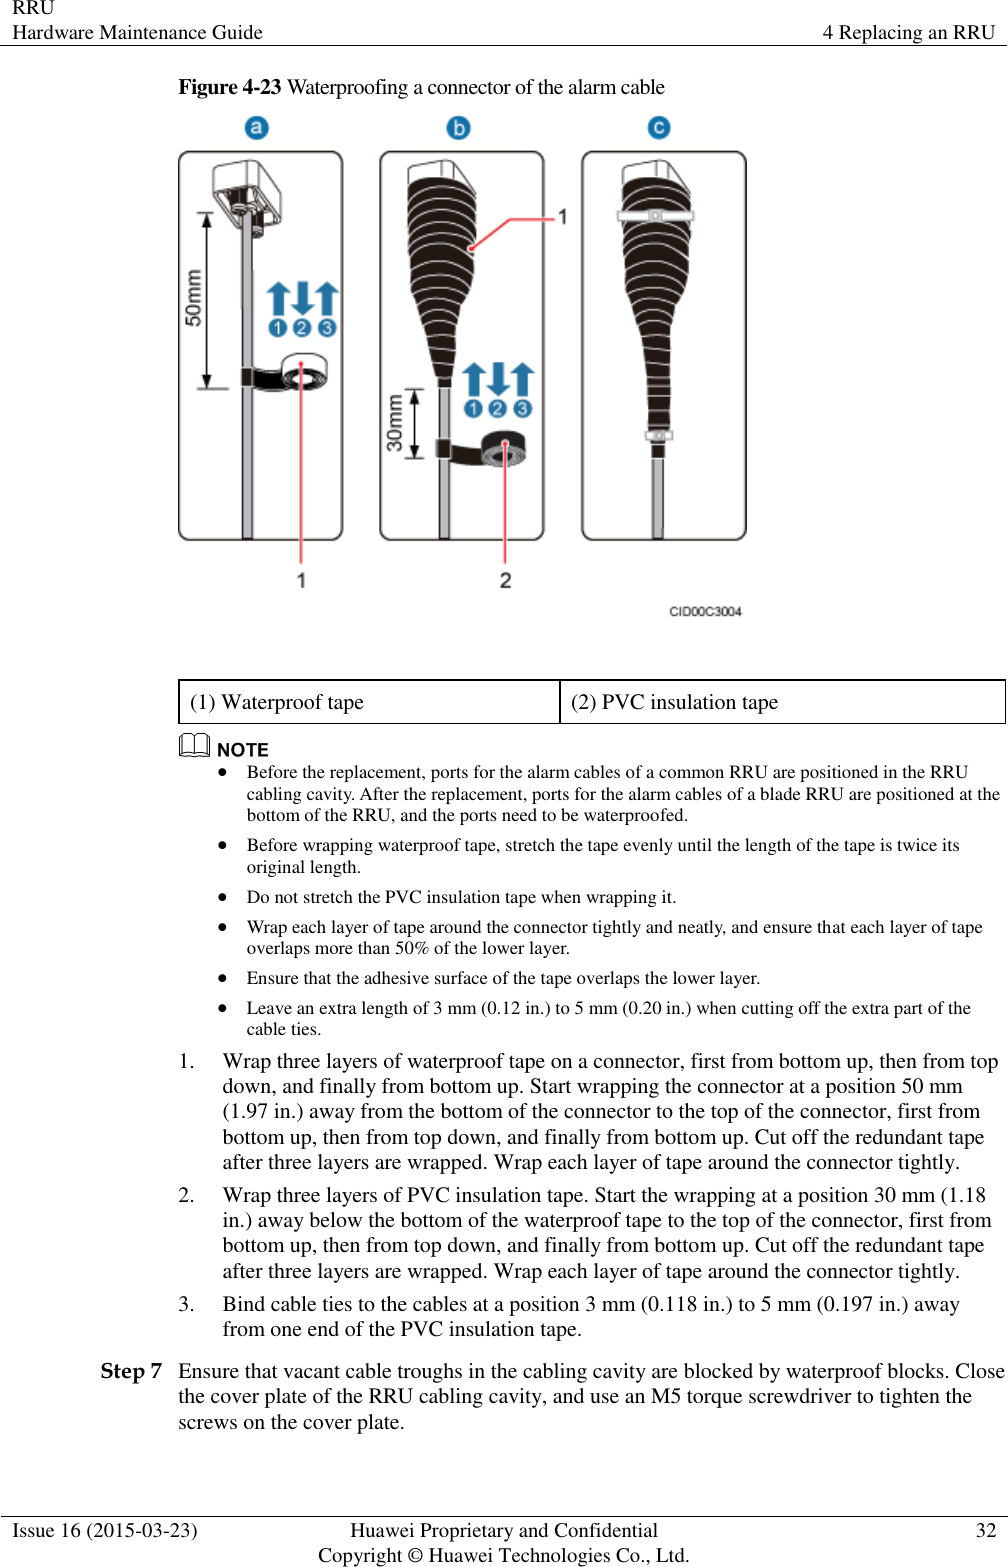 RRU Hardware Maintenance Guide 4 Replacing an RRU  Issue 16 (2015-03-23) Huawei Proprietary and Confidential                                     Copyright © Huawei Technologies Co., Ltd. 32  Figure 4-23 Waterproofing a connector of the alarm cable   (1) Waterproof tape (2) PVC insulation tape   Before the replacement, ports for the alarm cables of a common RRU are positioned in the RRU cabling cavity. After the replacement, ports for the alarm cables of a blade RRU are positioned at the bottom of the RRU, and the ports need to be waterproofed.  Before wrapping waterproof tape, stretch the tape evenly until the length of the tape is twice its original length.  Do not stretch the PVC insulation tape when wrapping it.  Wrap each layer of tape around the connector tightly and neatly, and ensure that each layer of tape overlaps more than 50% of the lower layer.  Ensure that the adhesive surface of the tape overlaps the lower layer.  Leave an extra length of 3 mm (0.12 in.) to 5 mm (0.20 in.) when cutting off the extra part of the cable ties. 1. Wrap three layers of waterproof tape on a connector, first from bottom up, then from top down, and finally from bottom up. Start wrapping the connector at a position 50 mm (1.97 in.) away from the bottom of the connector to the top of the connector, first from bottom up, then from top down, and finally from bottom up. Cut off the redundant tape after three layers are wrapped. Wrap each layer of tape around the connector tightly. 2. Wrap three layers of PVC insulation tape. Start the wrapping at a position 30 mm (1.18 in.) away below the bottom of the waterproof tape to the top of the connector, first from bottom up, then from top down, and finally from bottom up. Cut off the redundant tape after three layers are wrapped. Wrap each layer of tape around the connector tightly. 3. Bind cable ties to the cables at a position 3 mm (0.118 in.) to 5 mm (0.197 in.) away from one end of the PVC insulation tape. Step 7 Ensure that vacant cable troughs in the cabling cavity are blocked by waterproof blocks. Close the cover plate of the RRU cabling cavity, and use an M5 torque screwdriver to tighten the screws on the cover plate. 